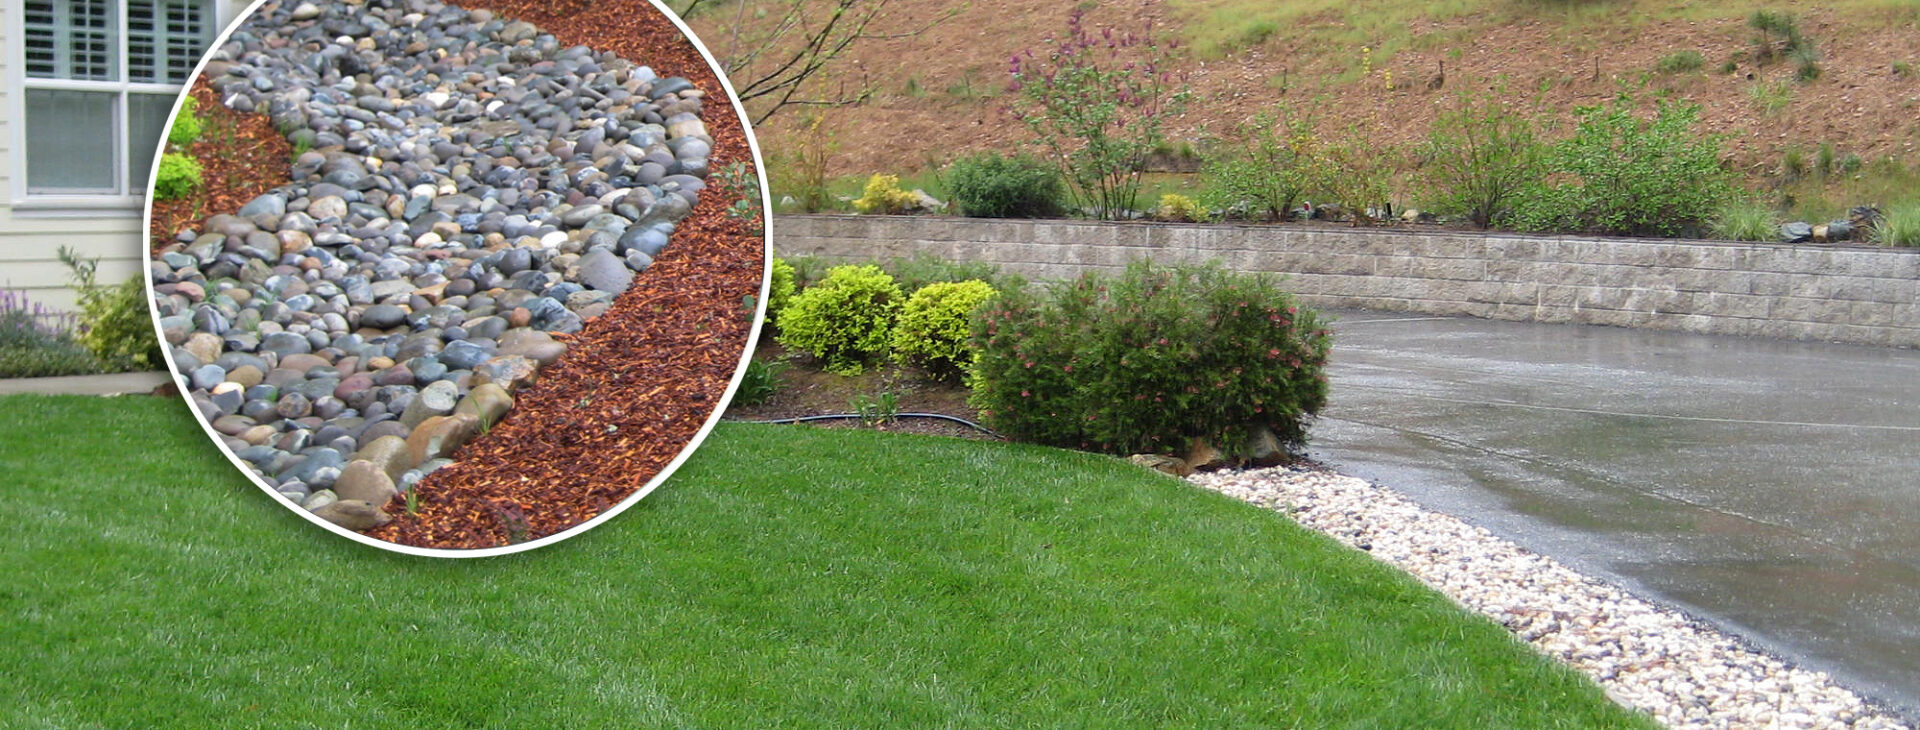 Storm drainage rock used for winter storm rain runoff, by Weiss Landscaping, serving Northern California.